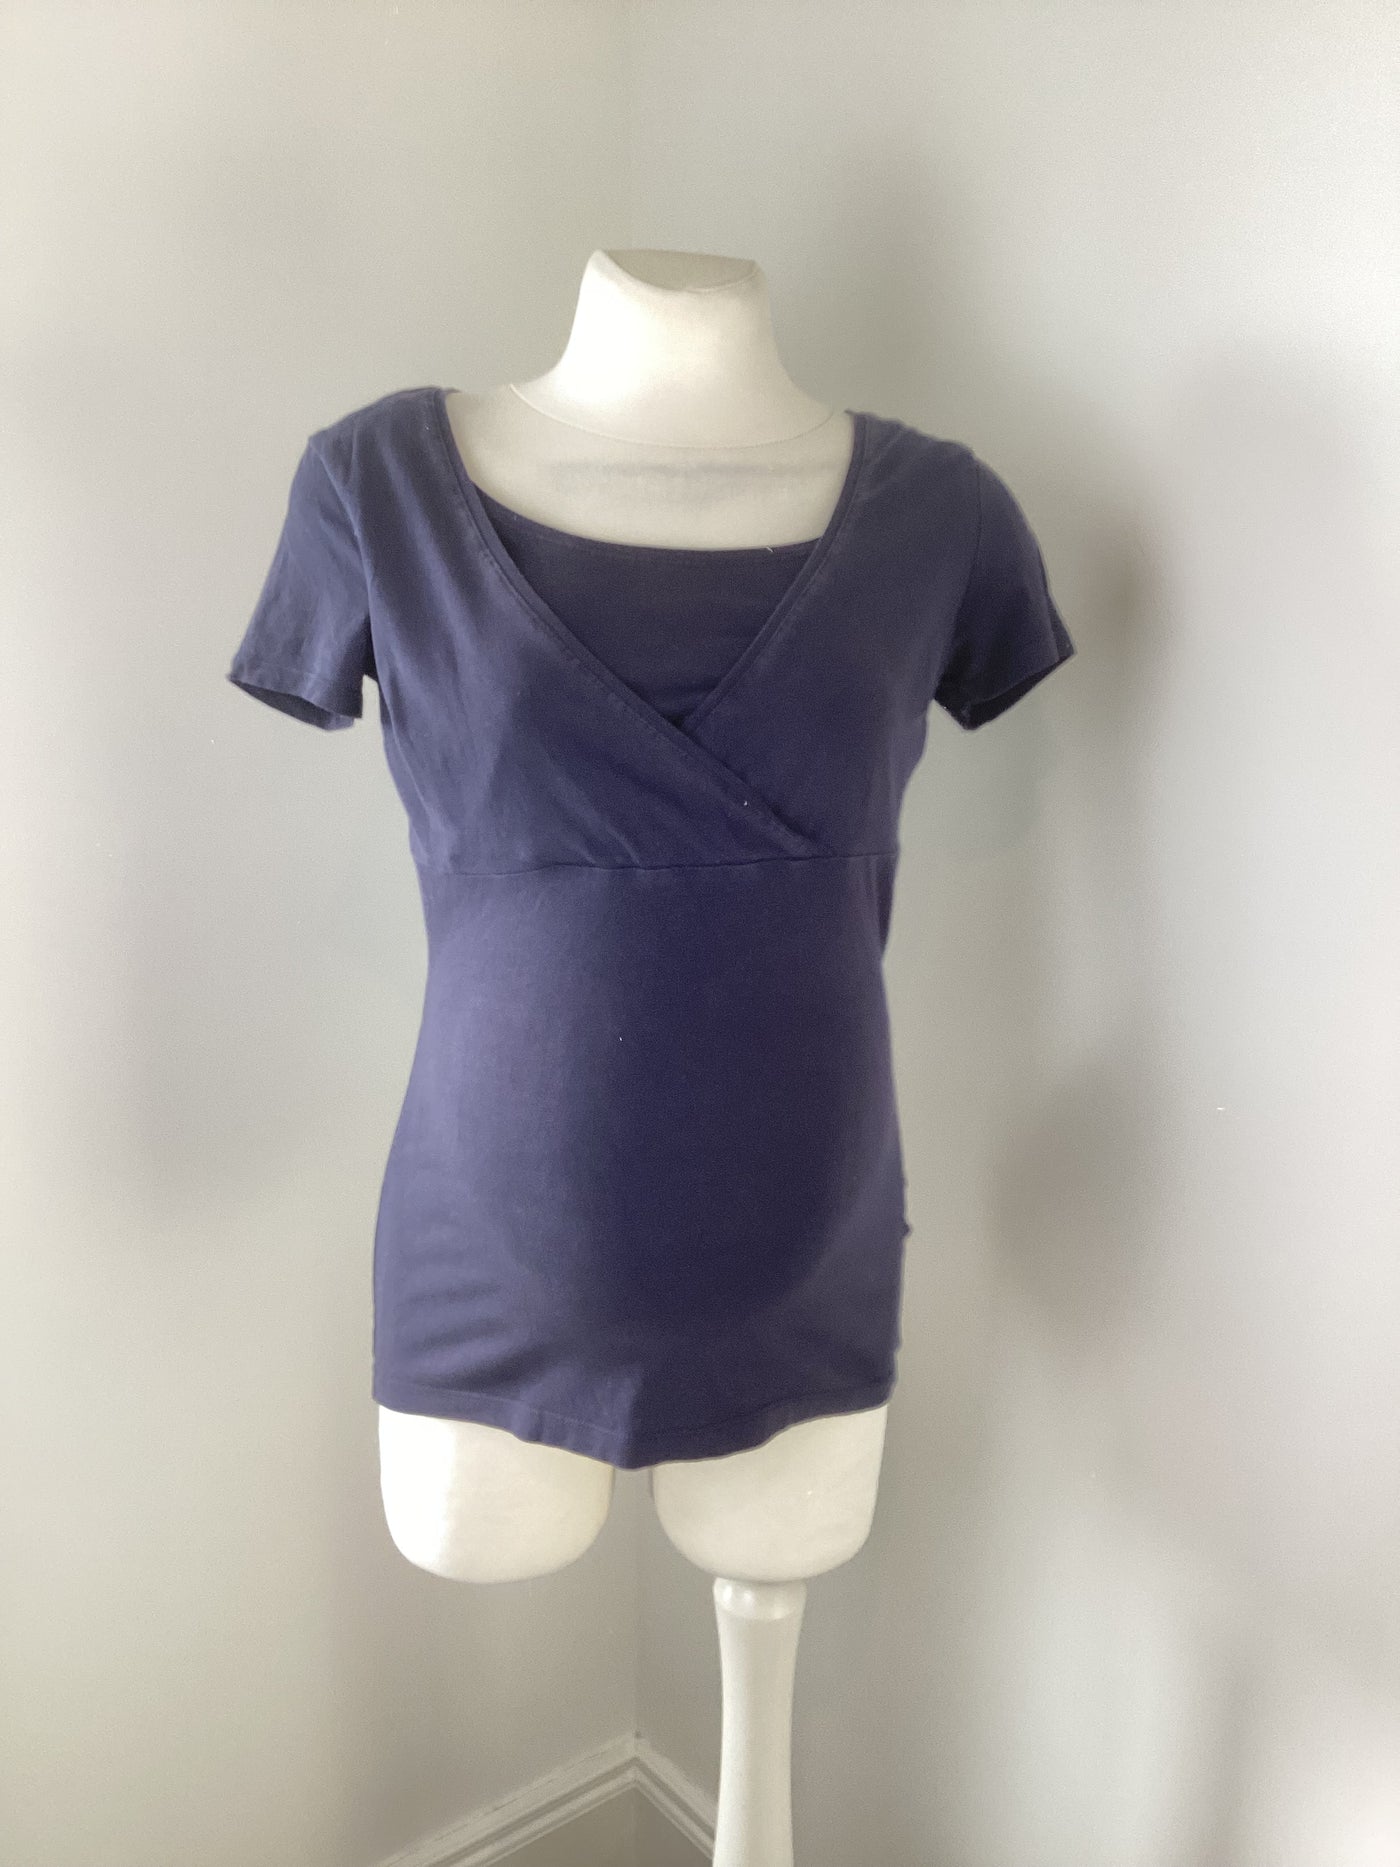 H&M Mama navy short sleeved nursing top - Size S (Approx UK 8/10)